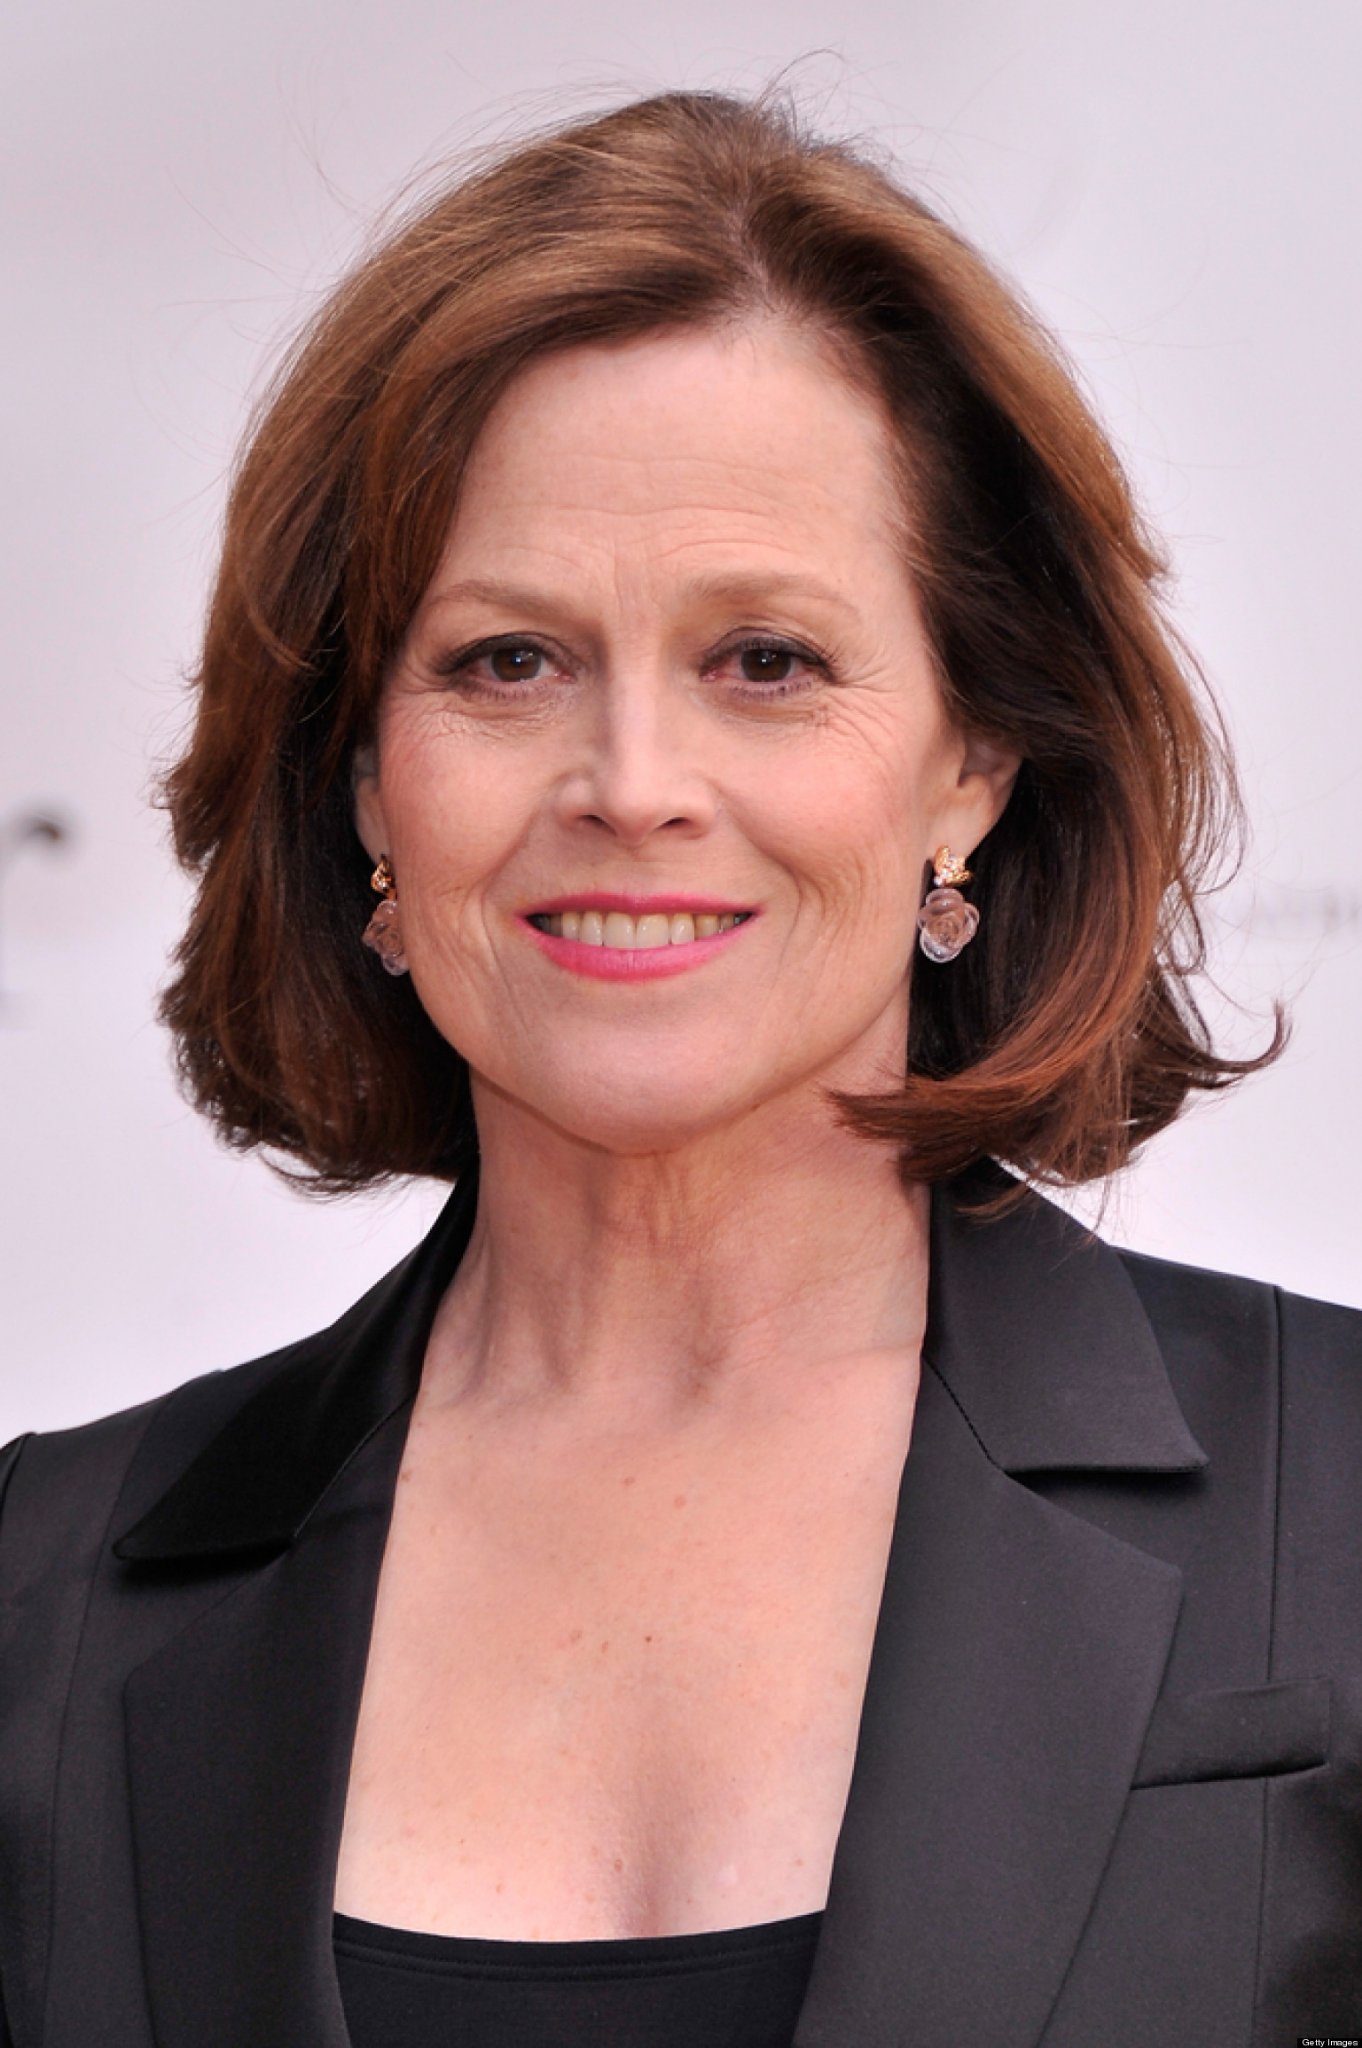 Happy birthday to the beautiful Actress  sigourney Weaver that turns 68 today 